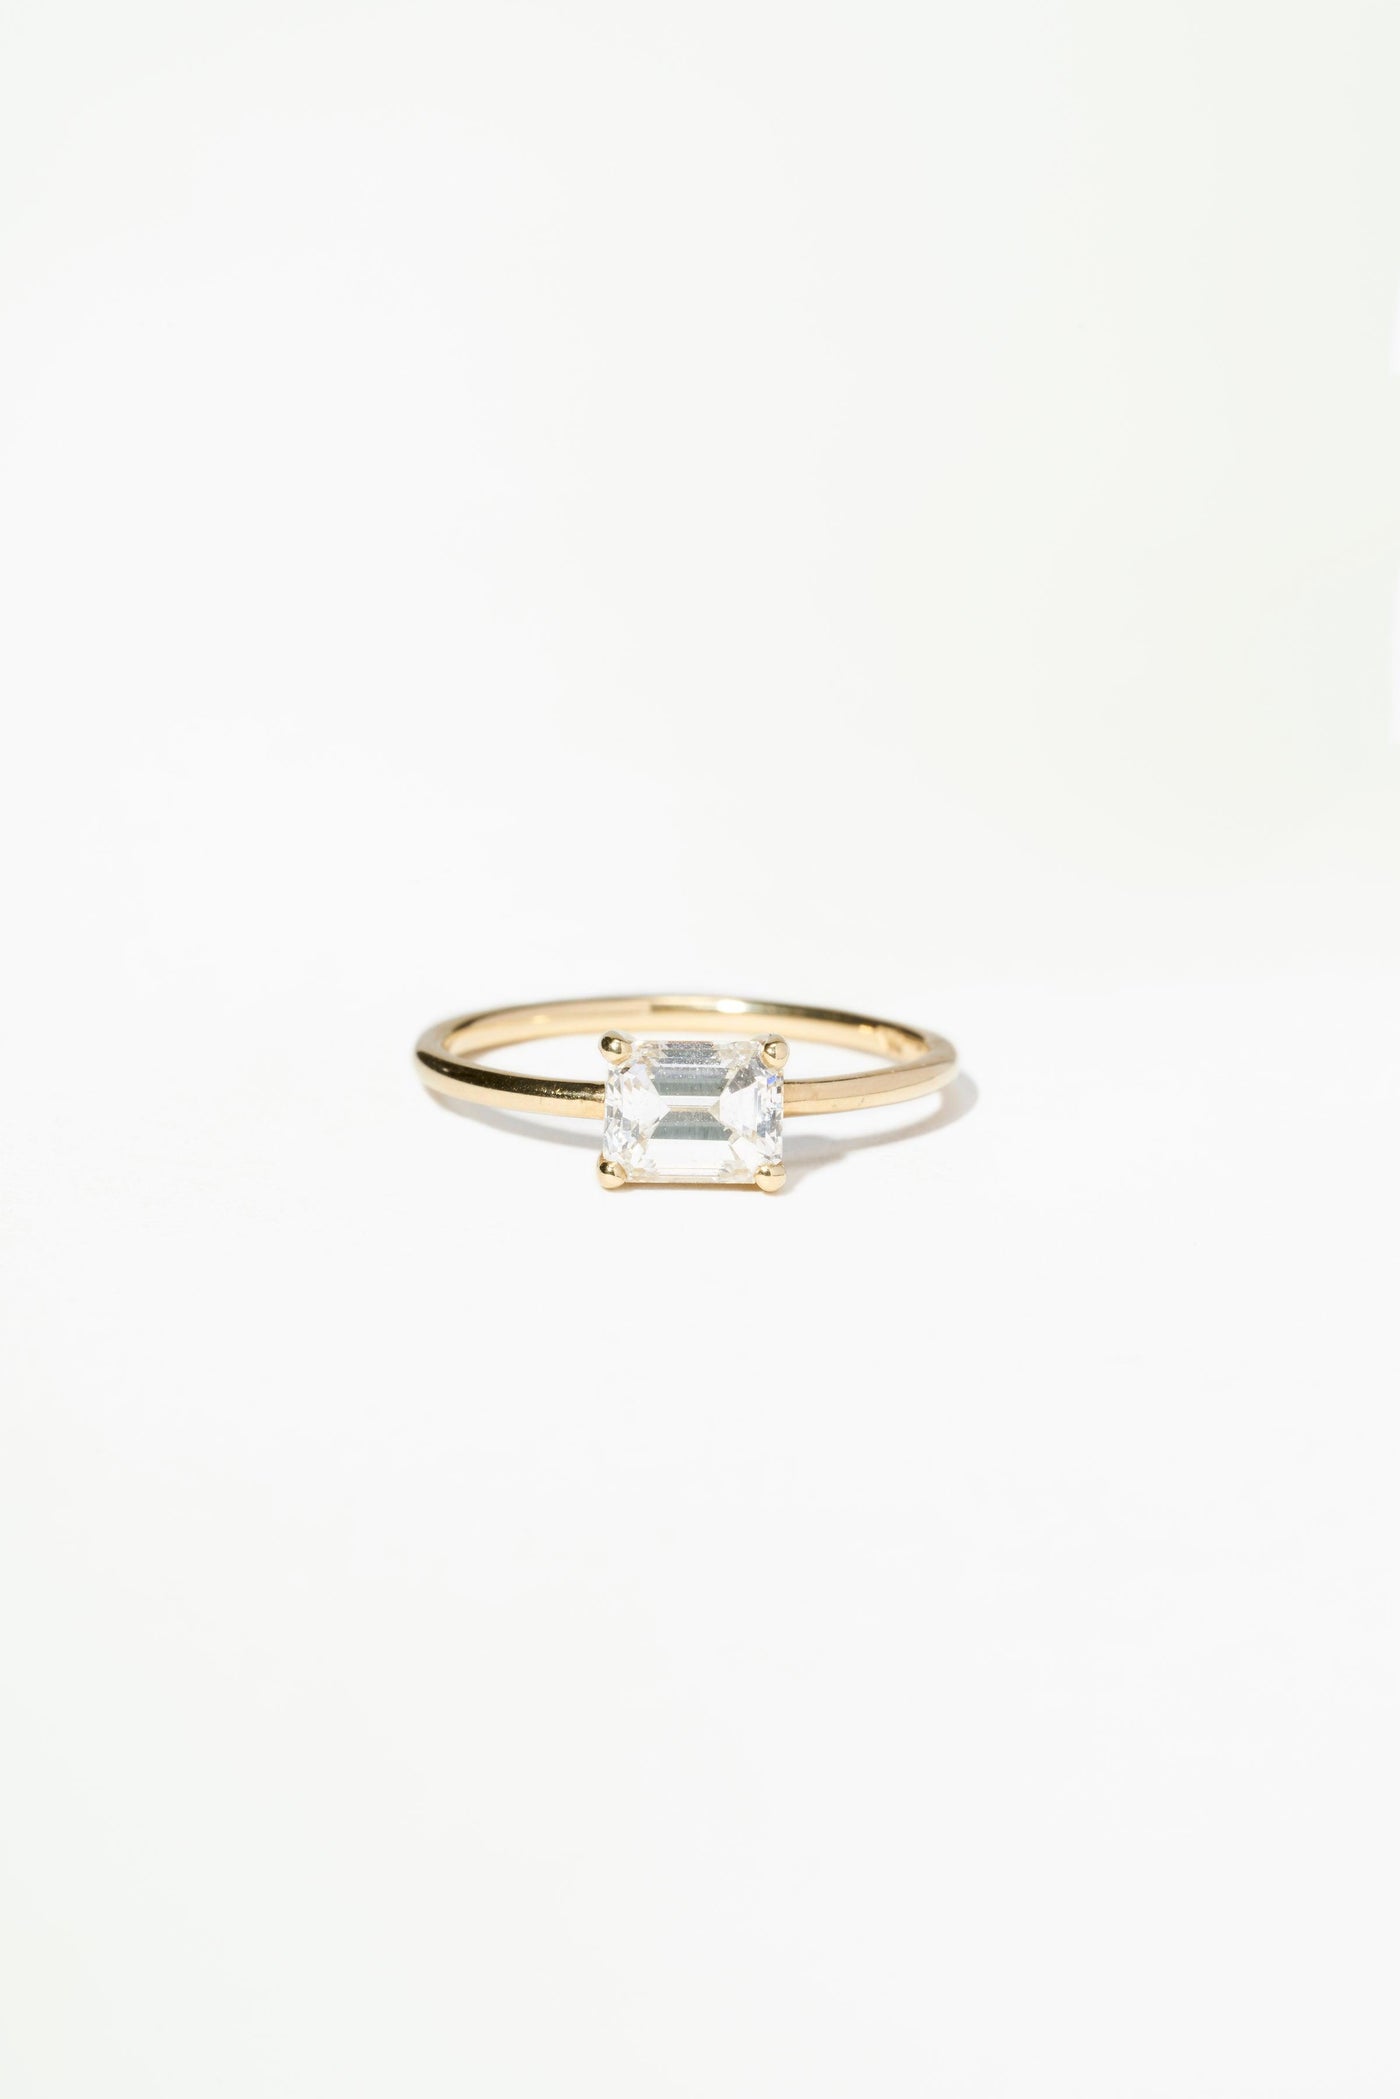 Large Emerald Cut Solitaire Ring - WWAKE